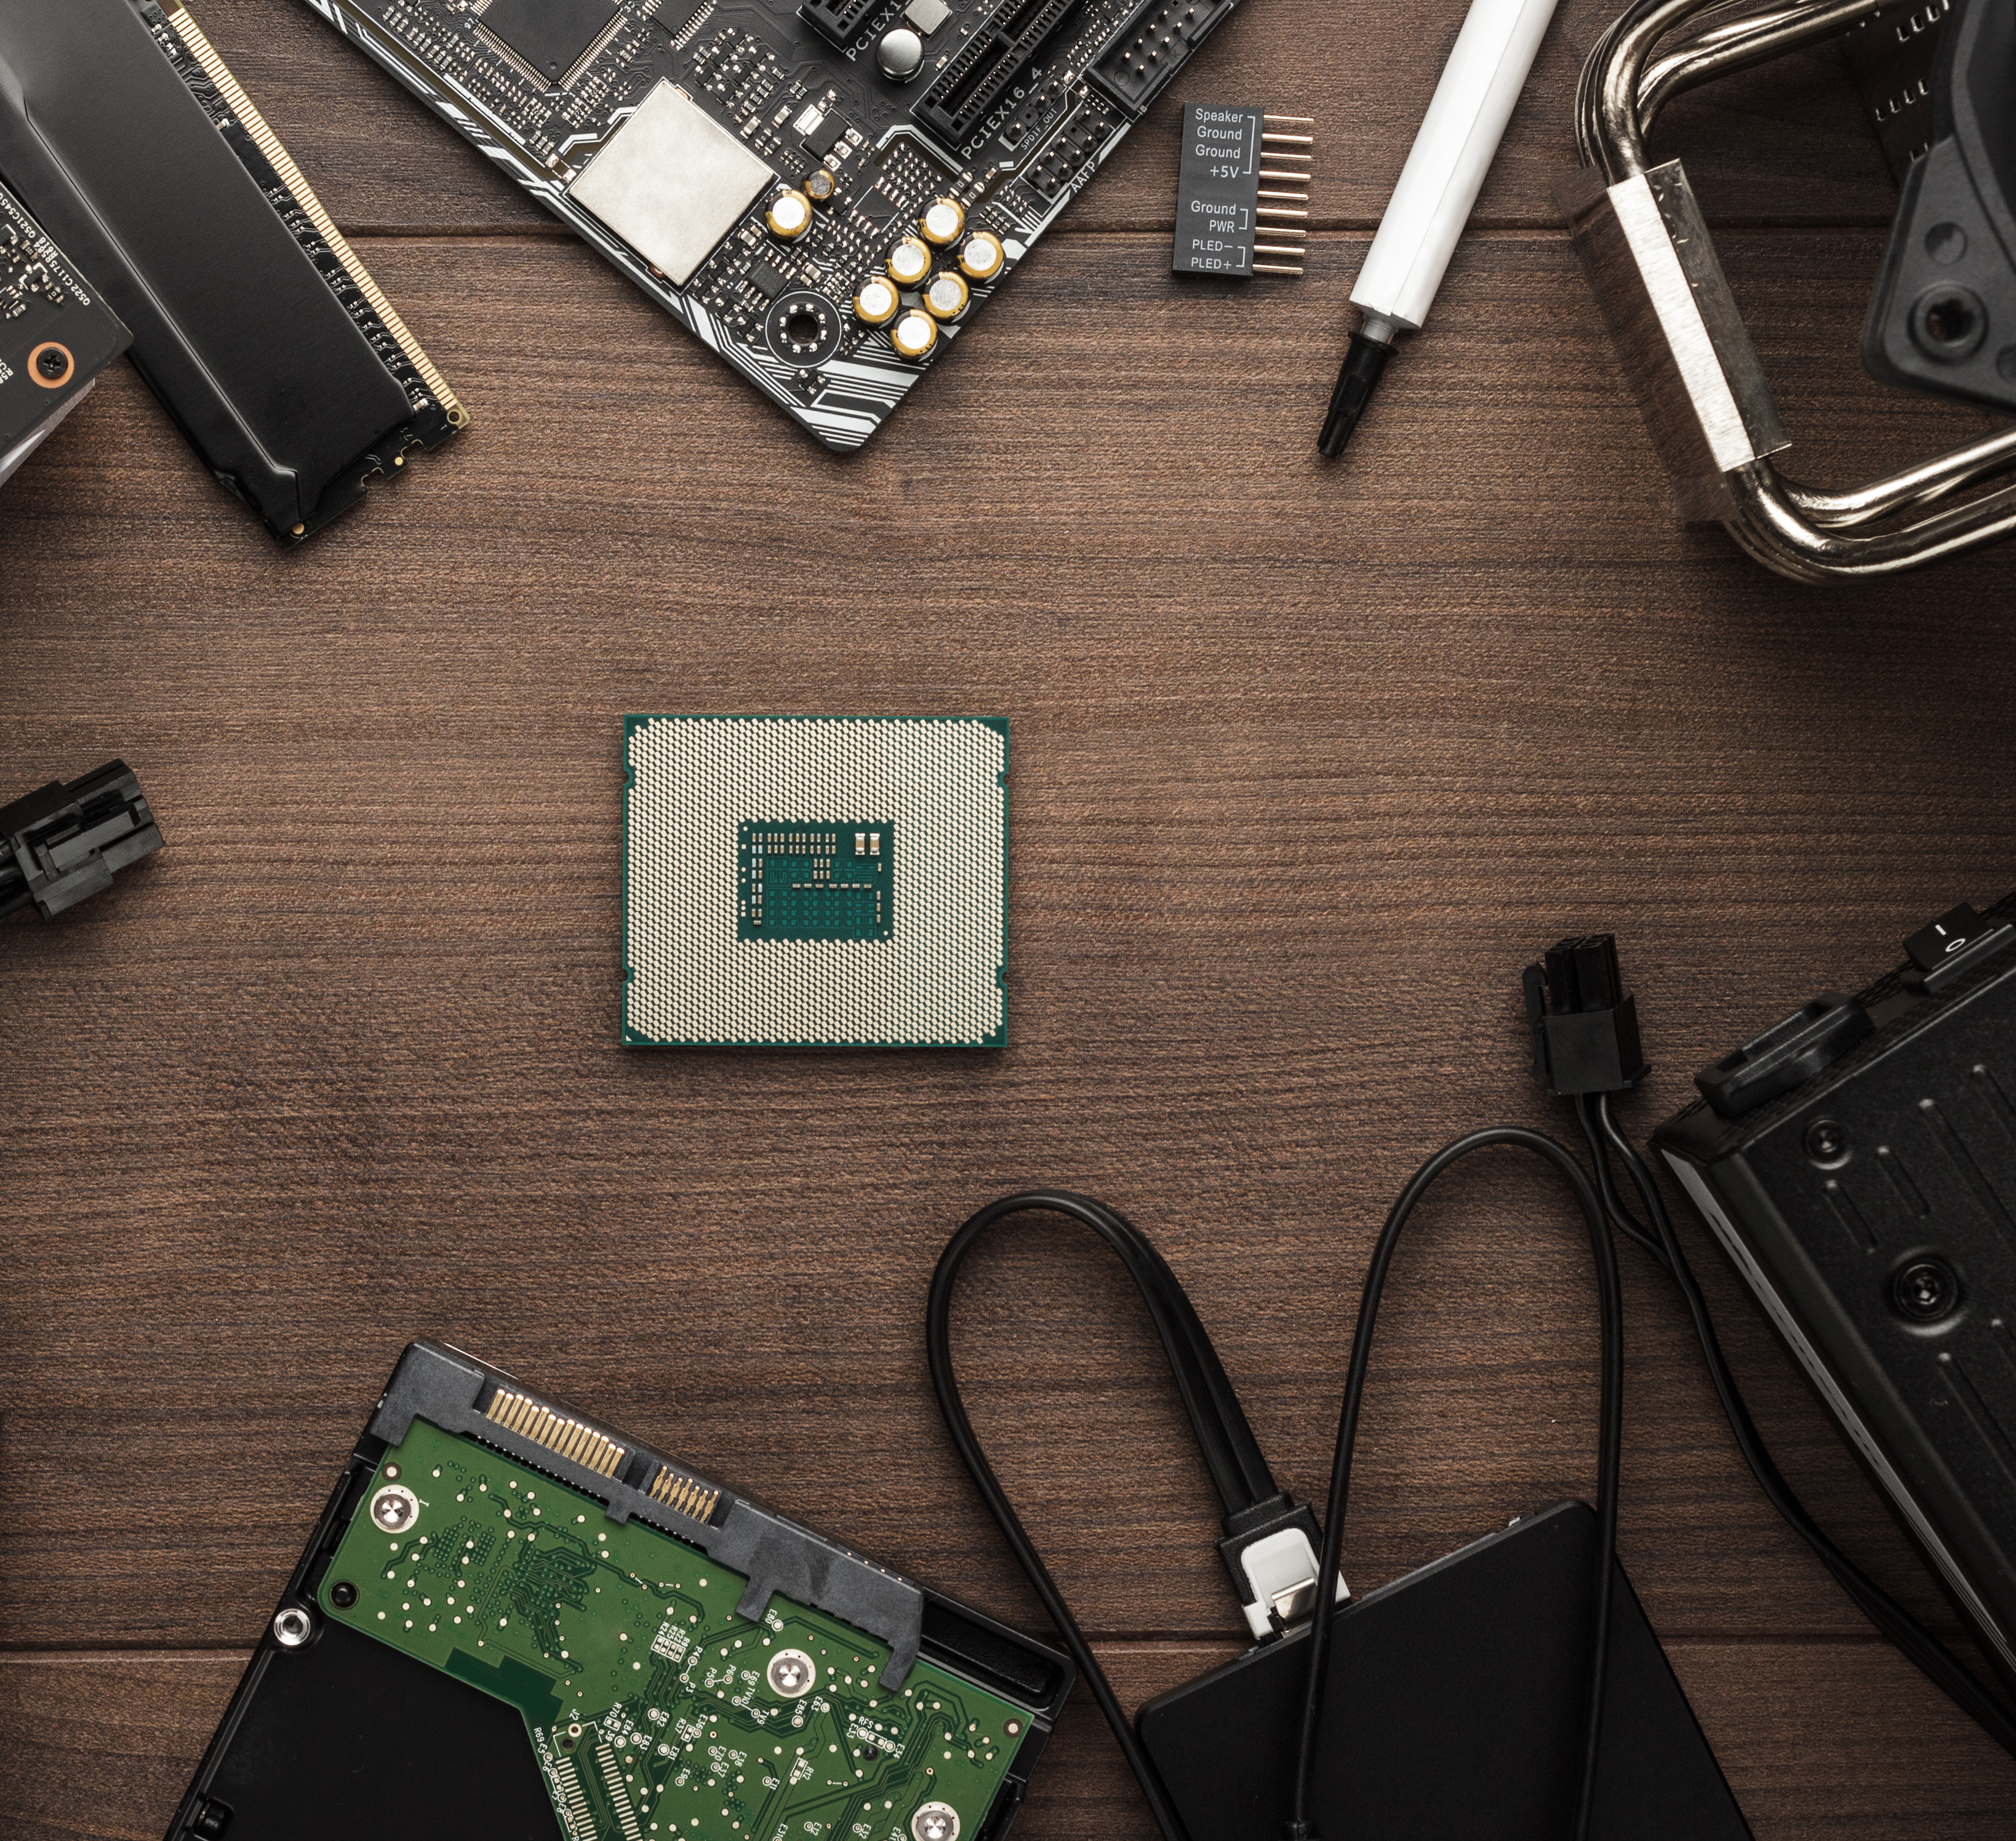 How to maintain and clean PC hardware